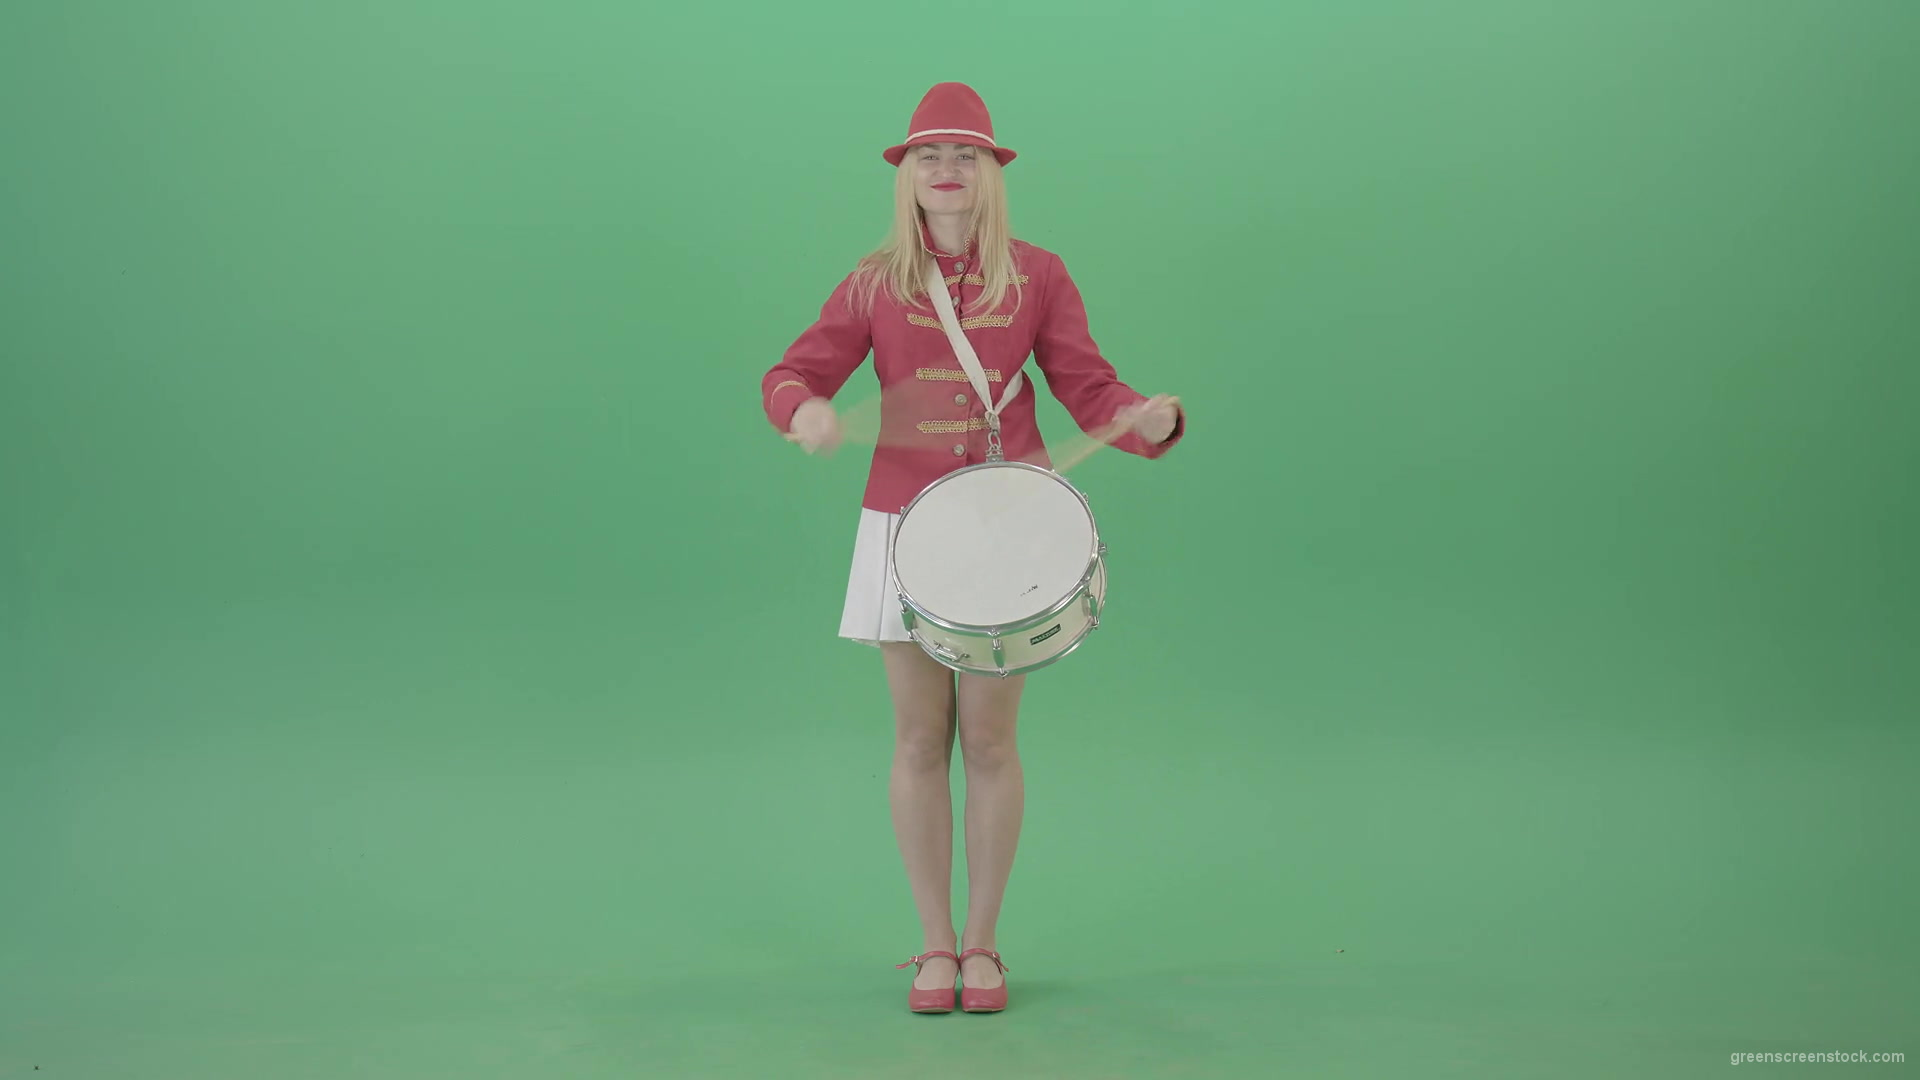 Girl-fast-playing-drum-music-instrument-isolated-on-Green-Background-4K-Video-Footage-1920_007 Green Screen Stock